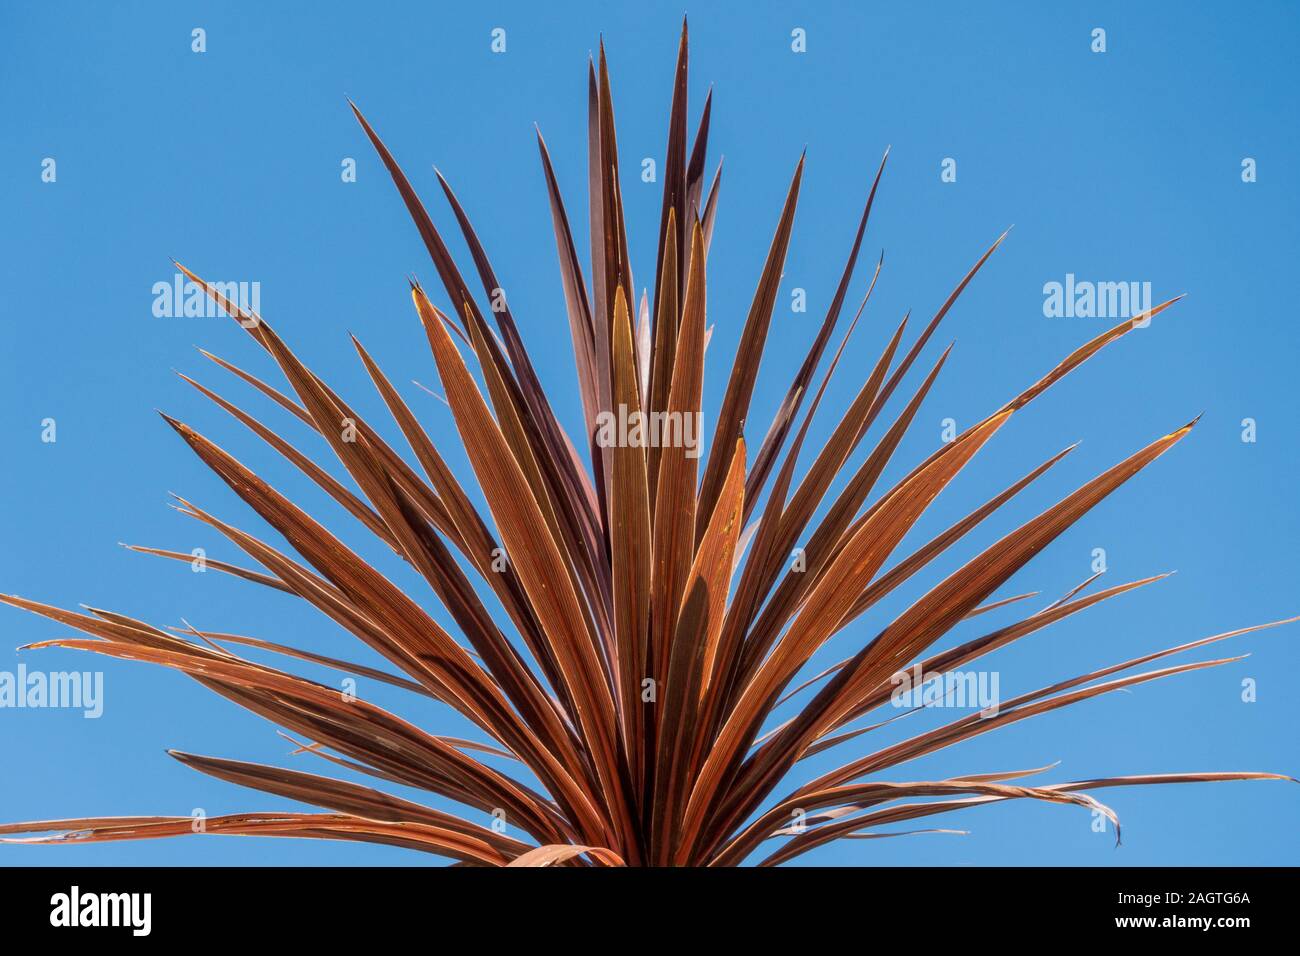 Translucent Cordyline australis 'Torbay Red' plant leaves against clear blue sky background in Summer Stock Photo